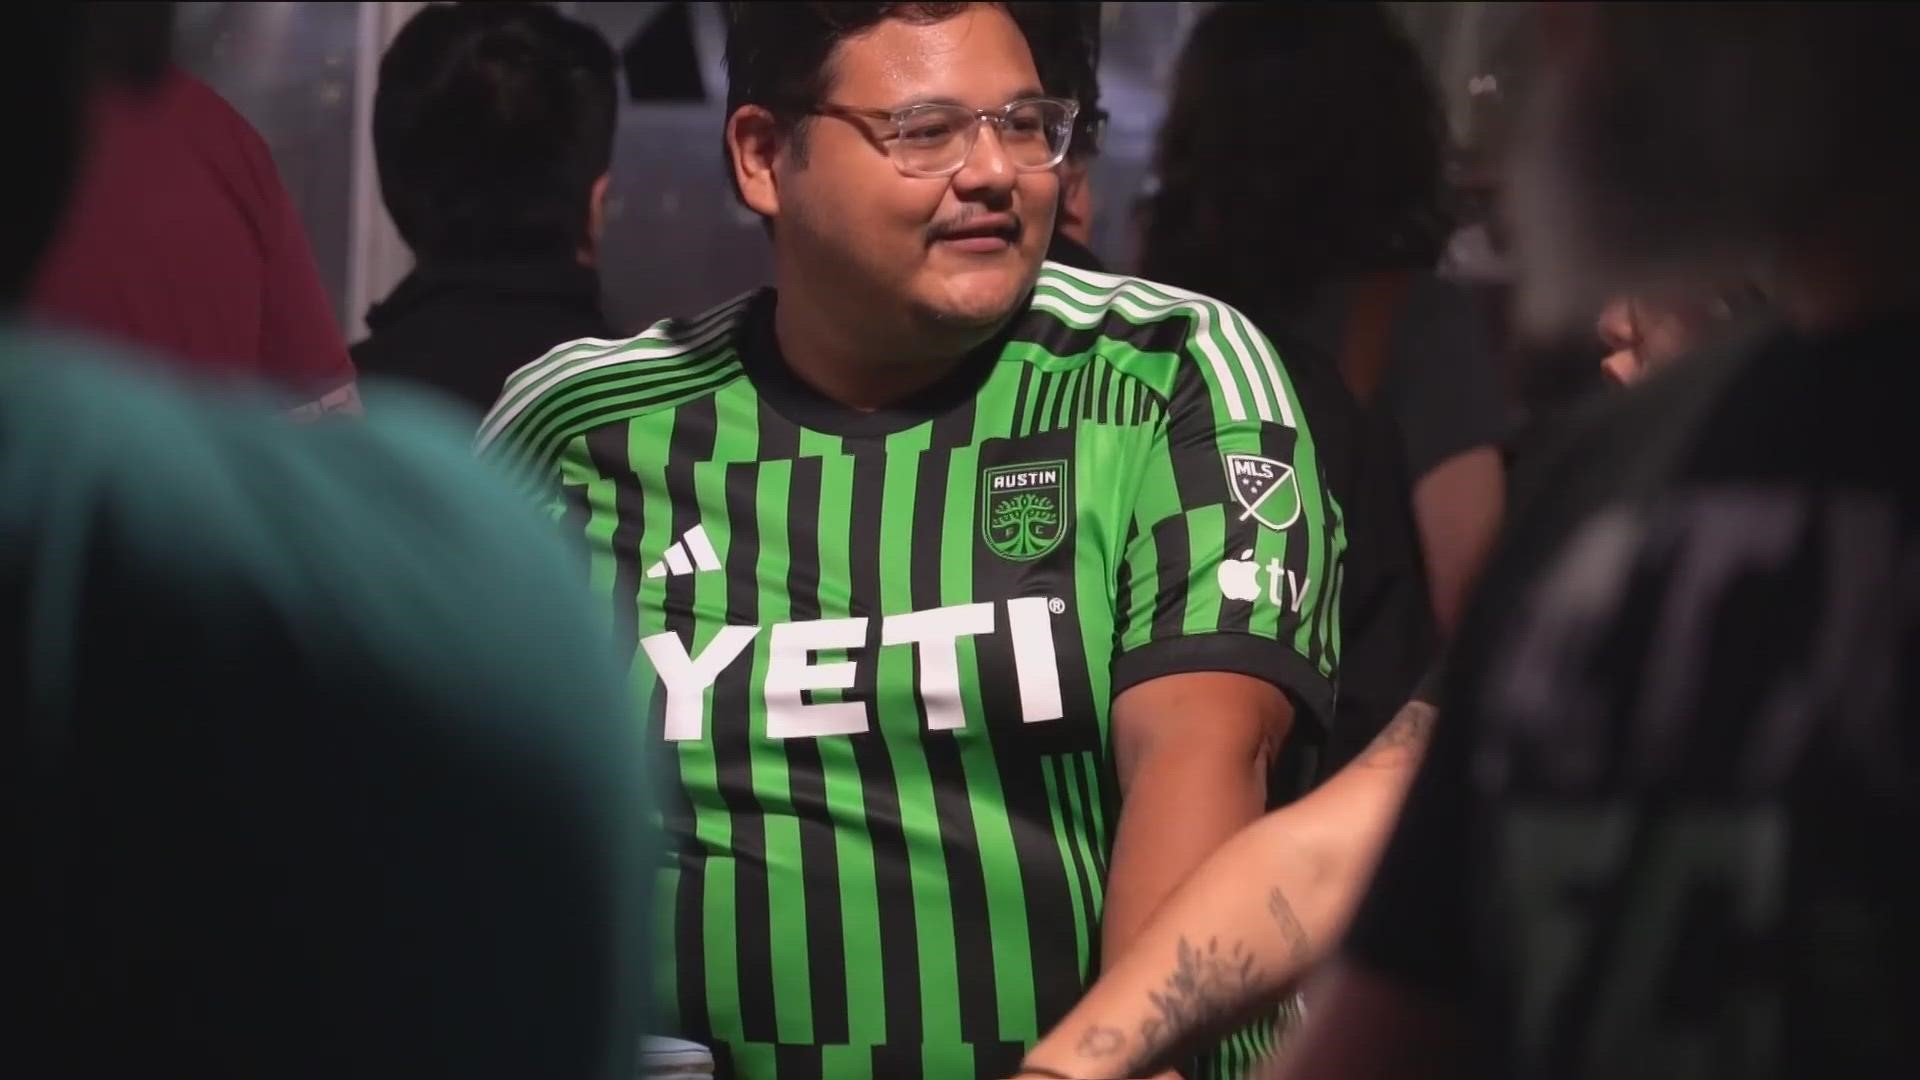 We're 10 days away from the start of Austin FC's regular season! On Wednesday, we got a look at their newest jerseys.